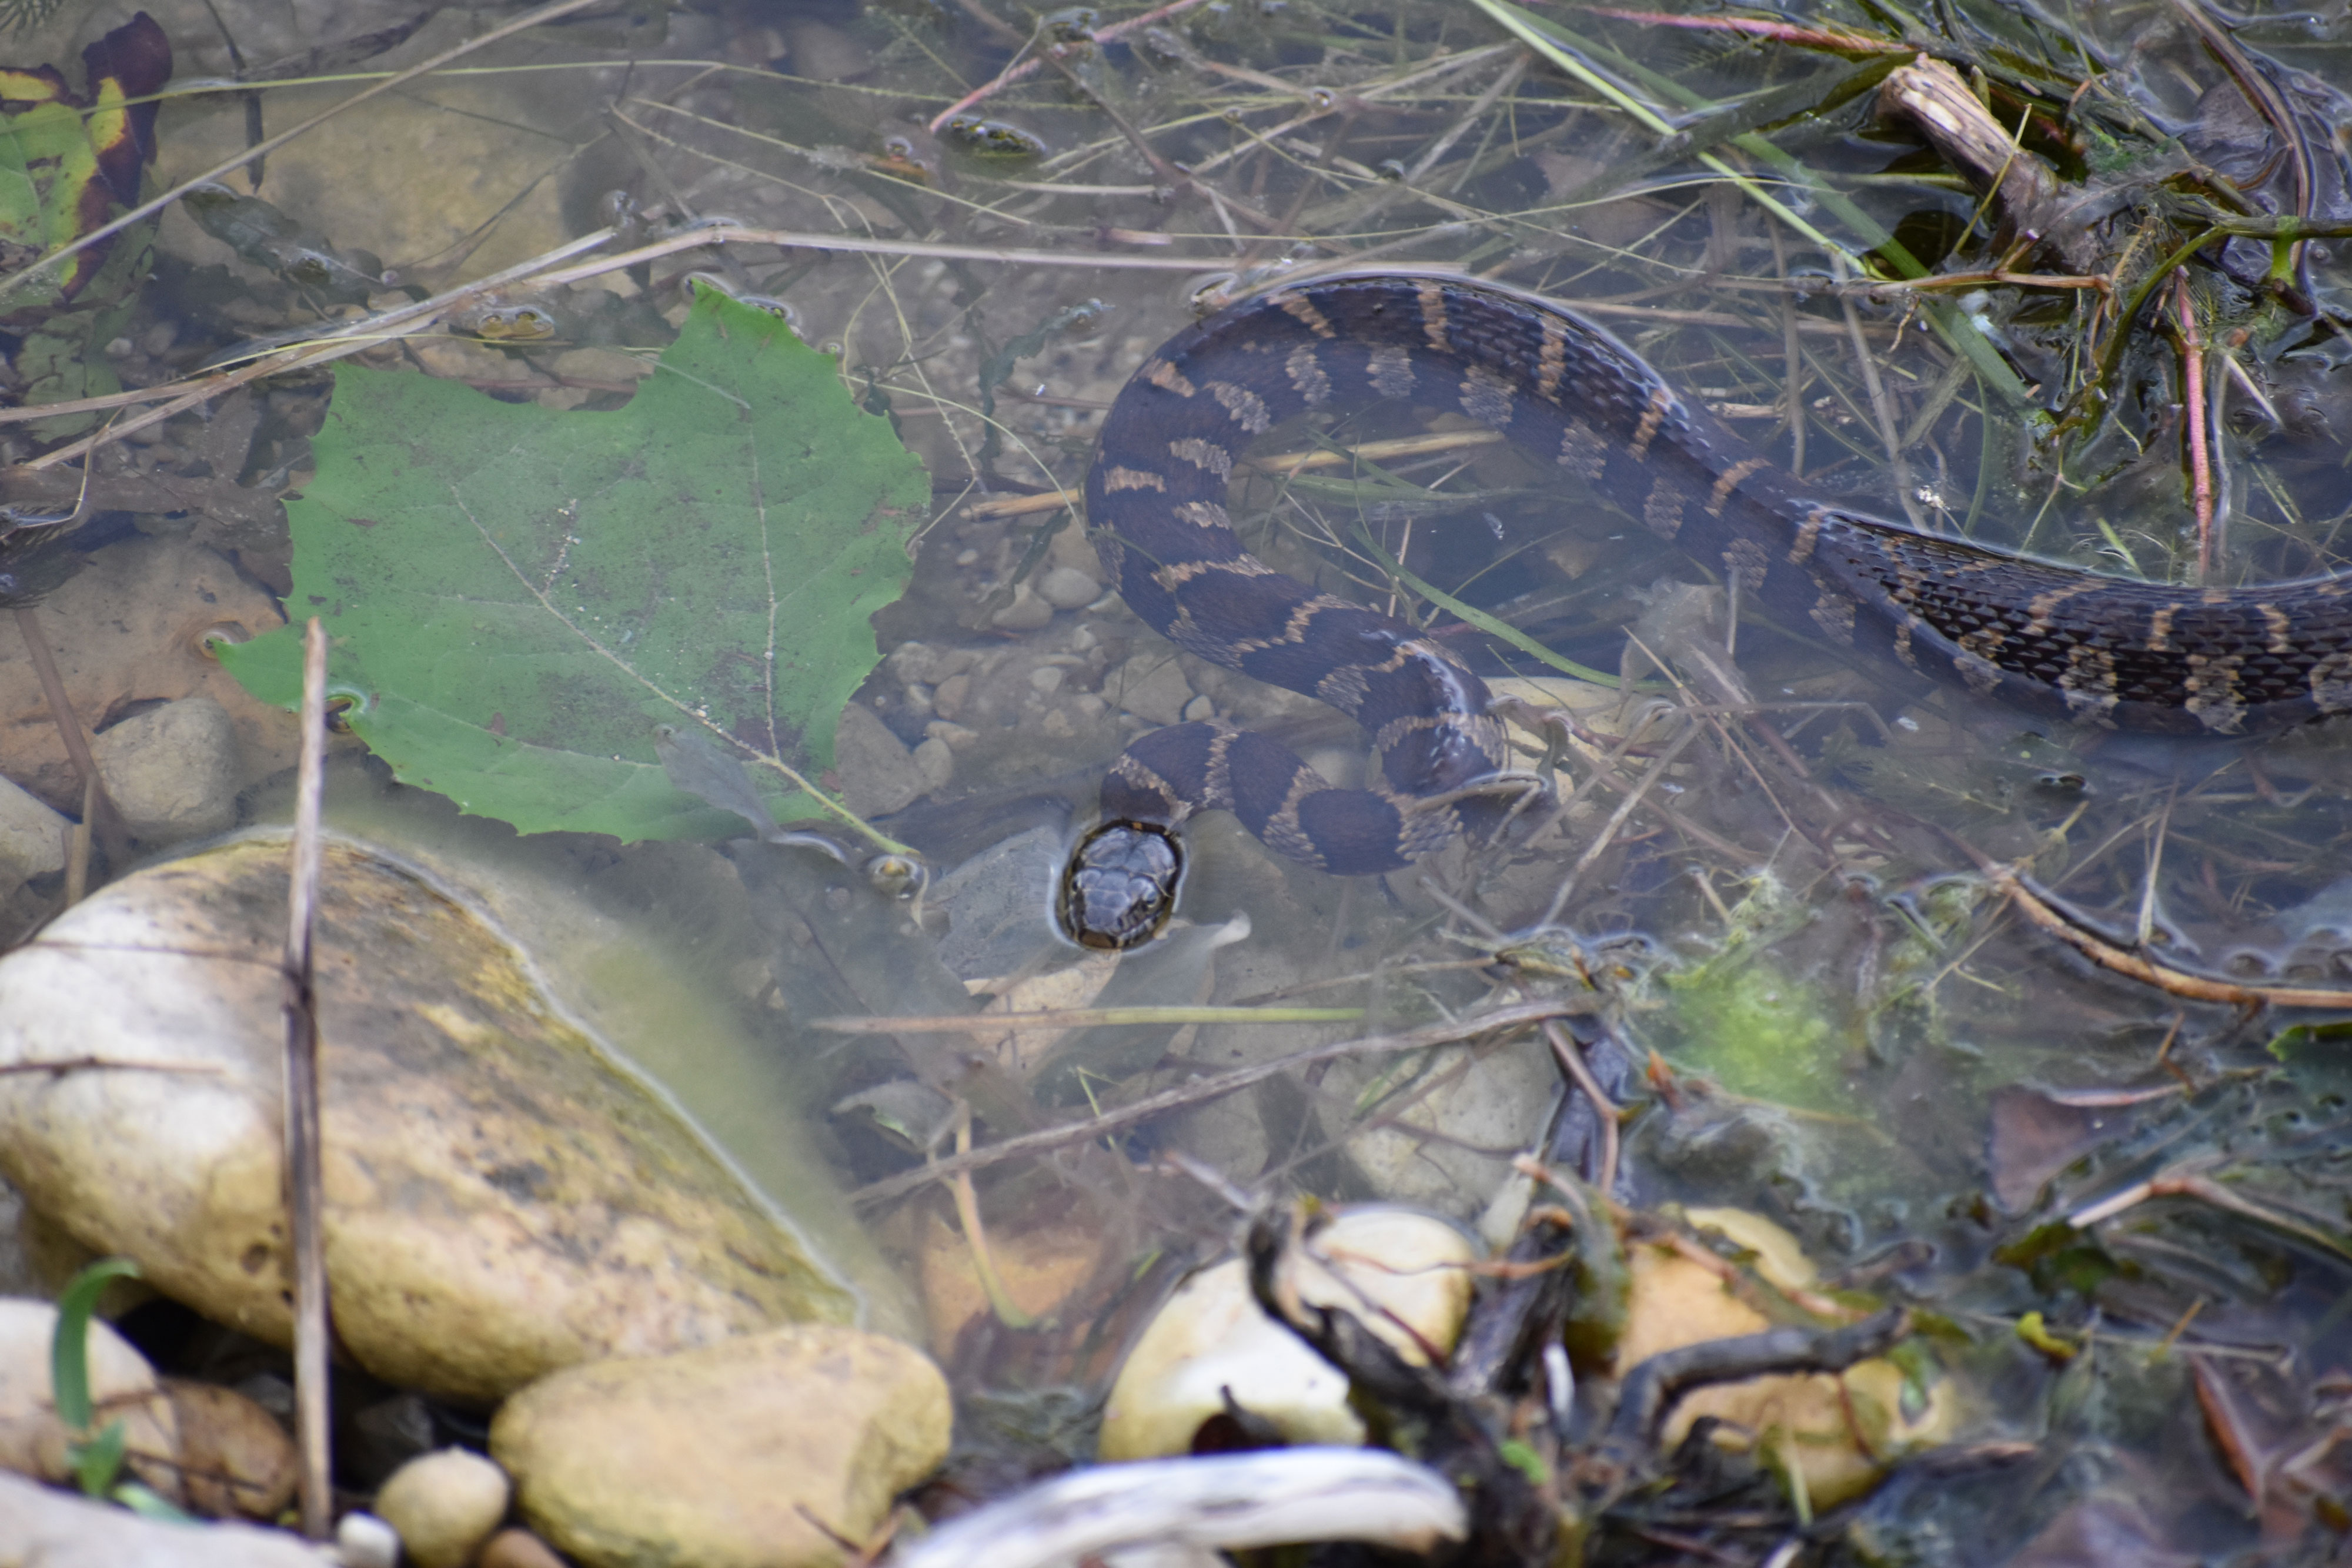 A northern water snake poking out of the water.